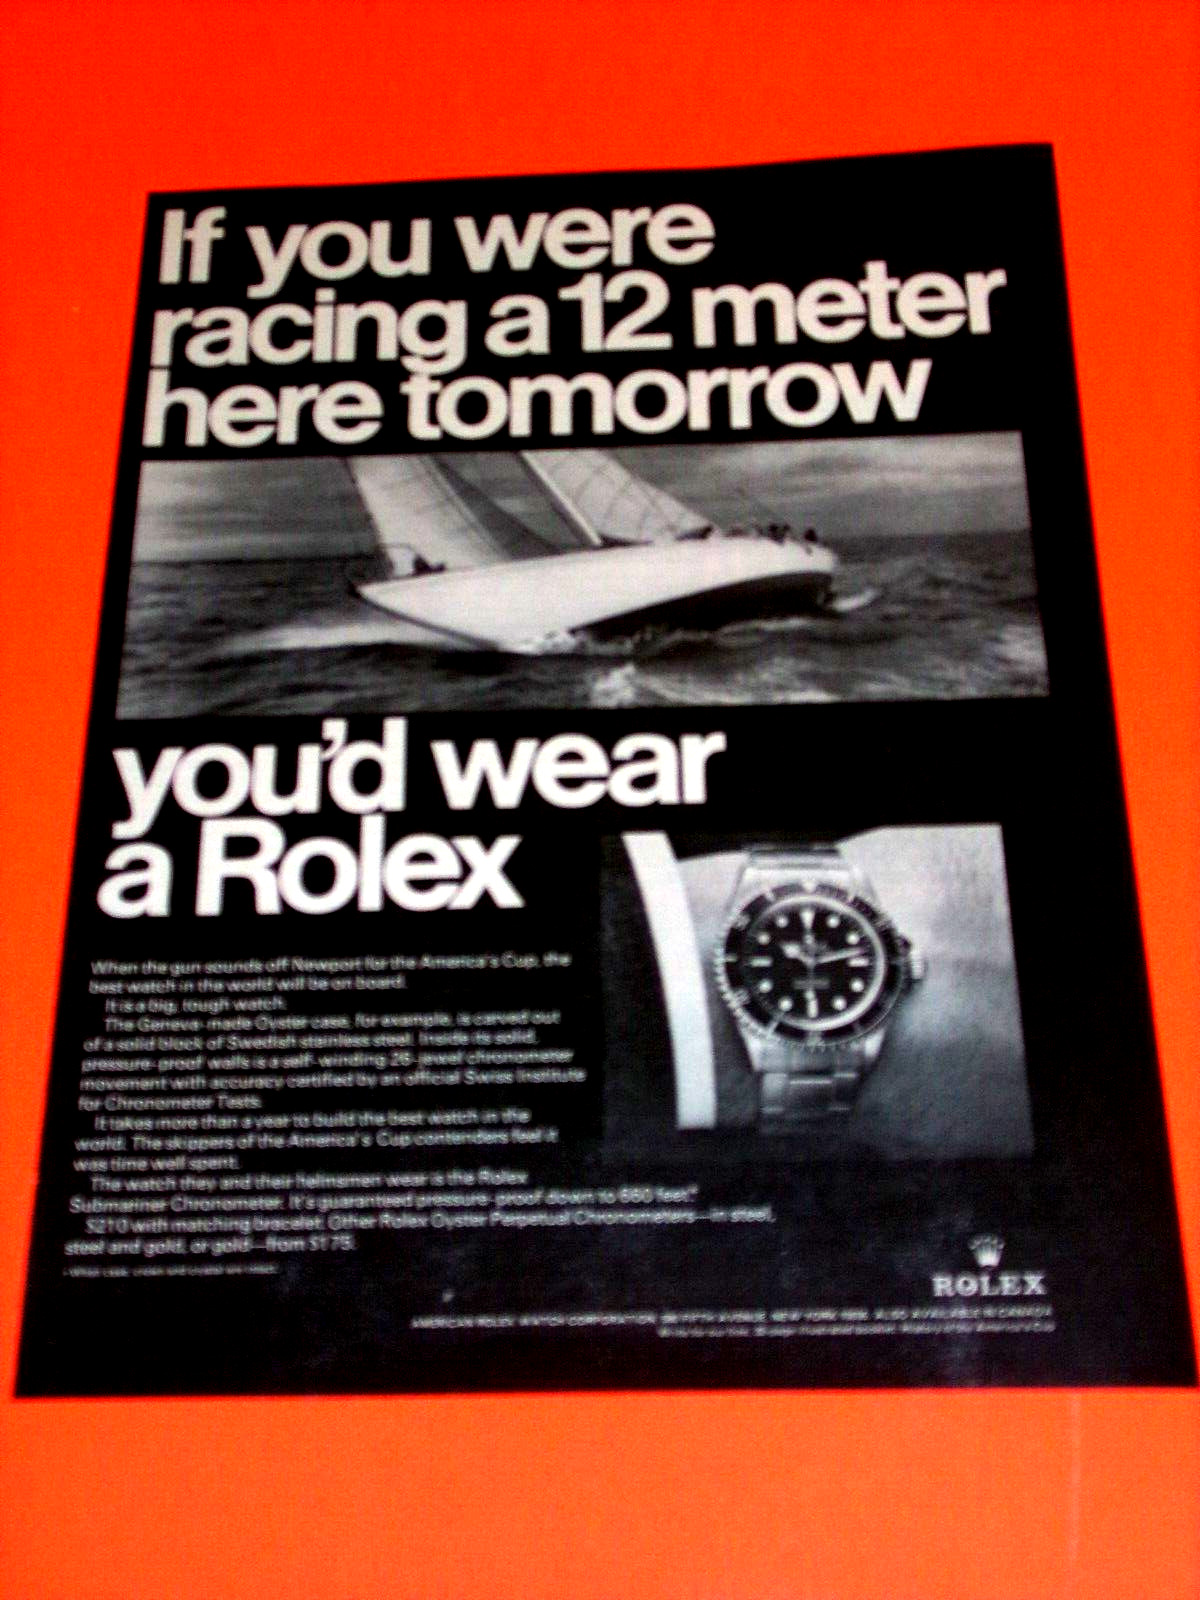 1967 Rolex Submariner Chronometer Watch Ad If you were racing a 12-meter tomorrw